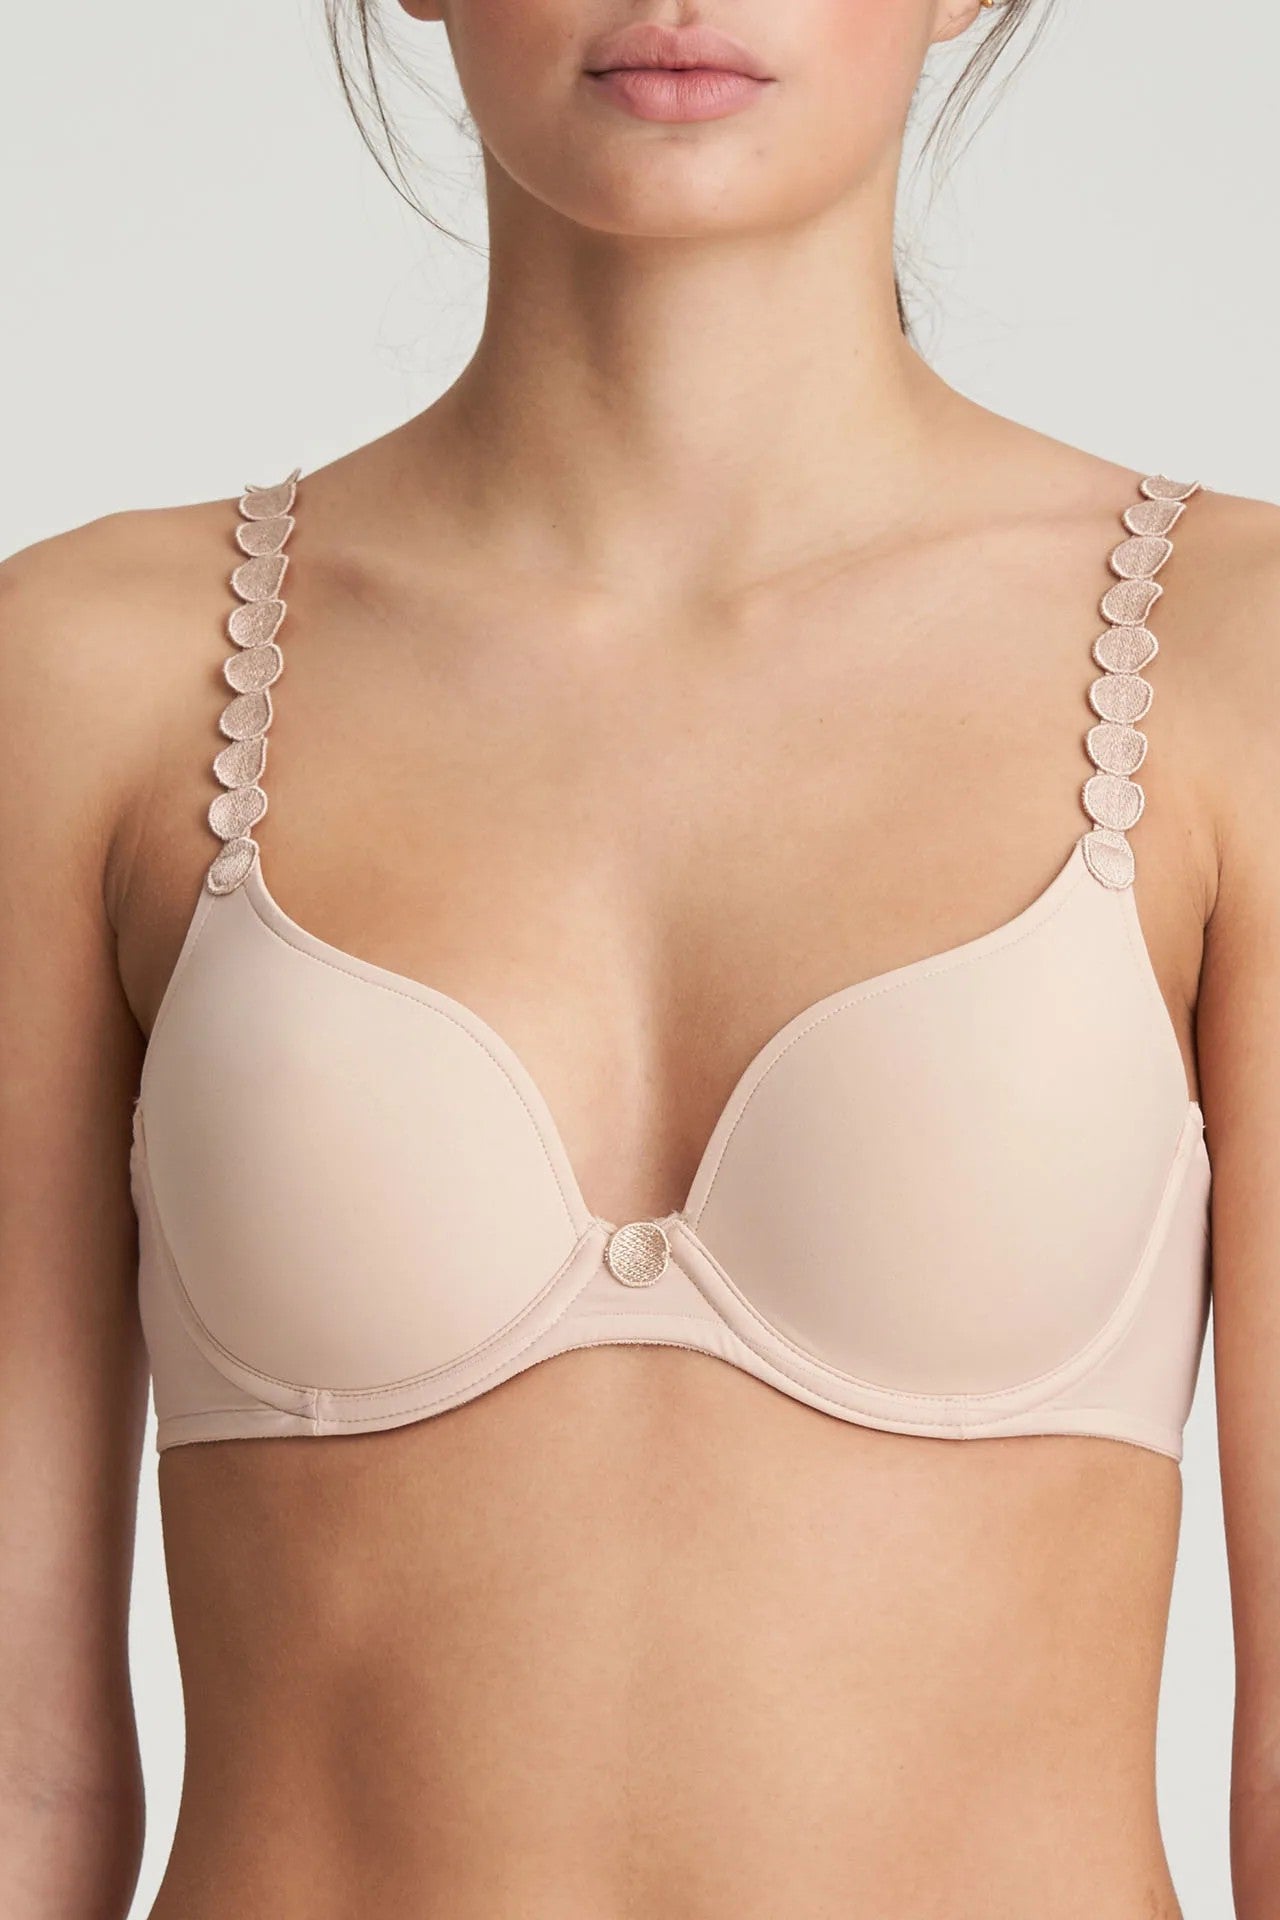 Melmira Bra & Swimsuits - The Marie Jo Lingerie 'Jane' is getting a new  look this winter season. For a limited time, this lacy t-shirt bra is  available in 'Iced Coffee'. Order